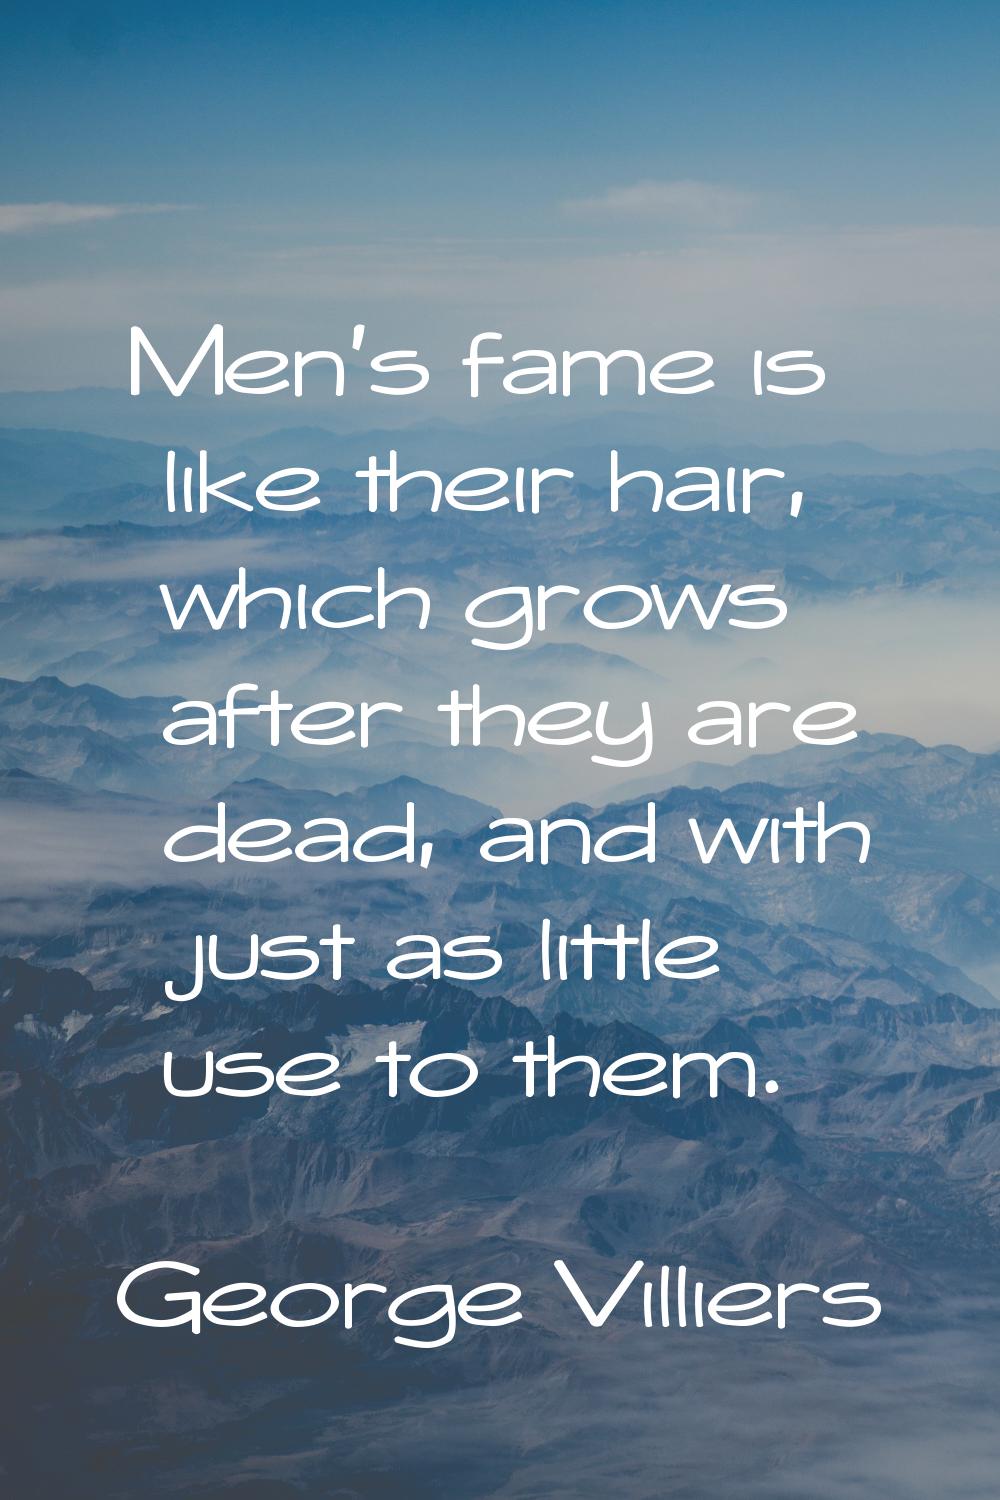 Men's fame is like their hair, which grows after they are dead, and with just as little use to them